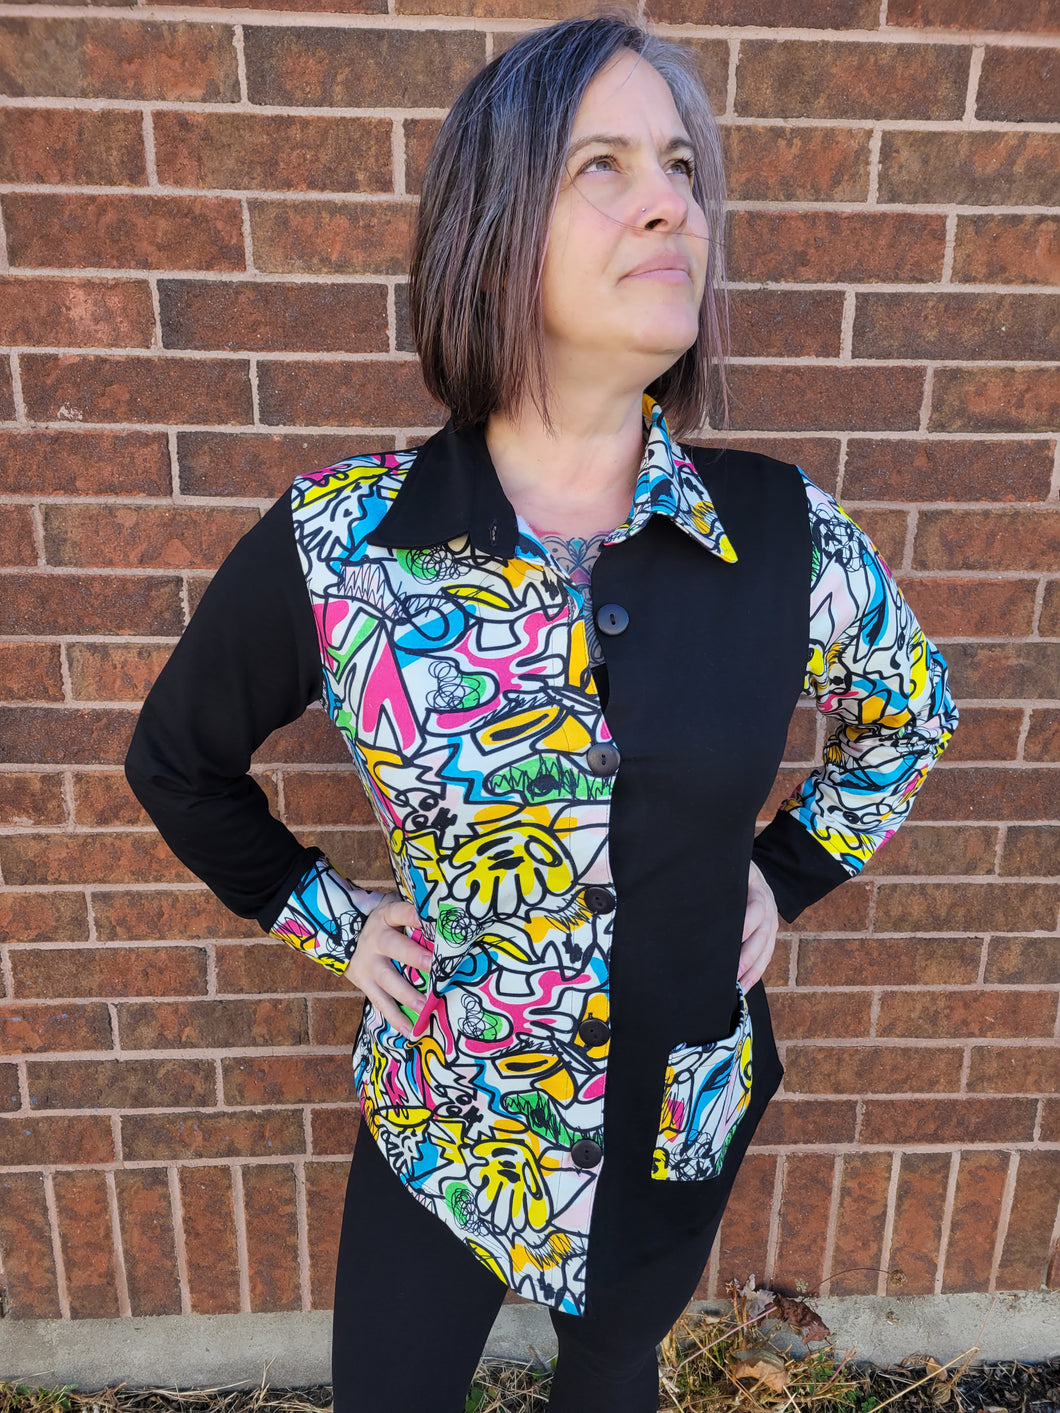 Emma Graffiti Shirt by Parsley and Sage (available in plus sizes)